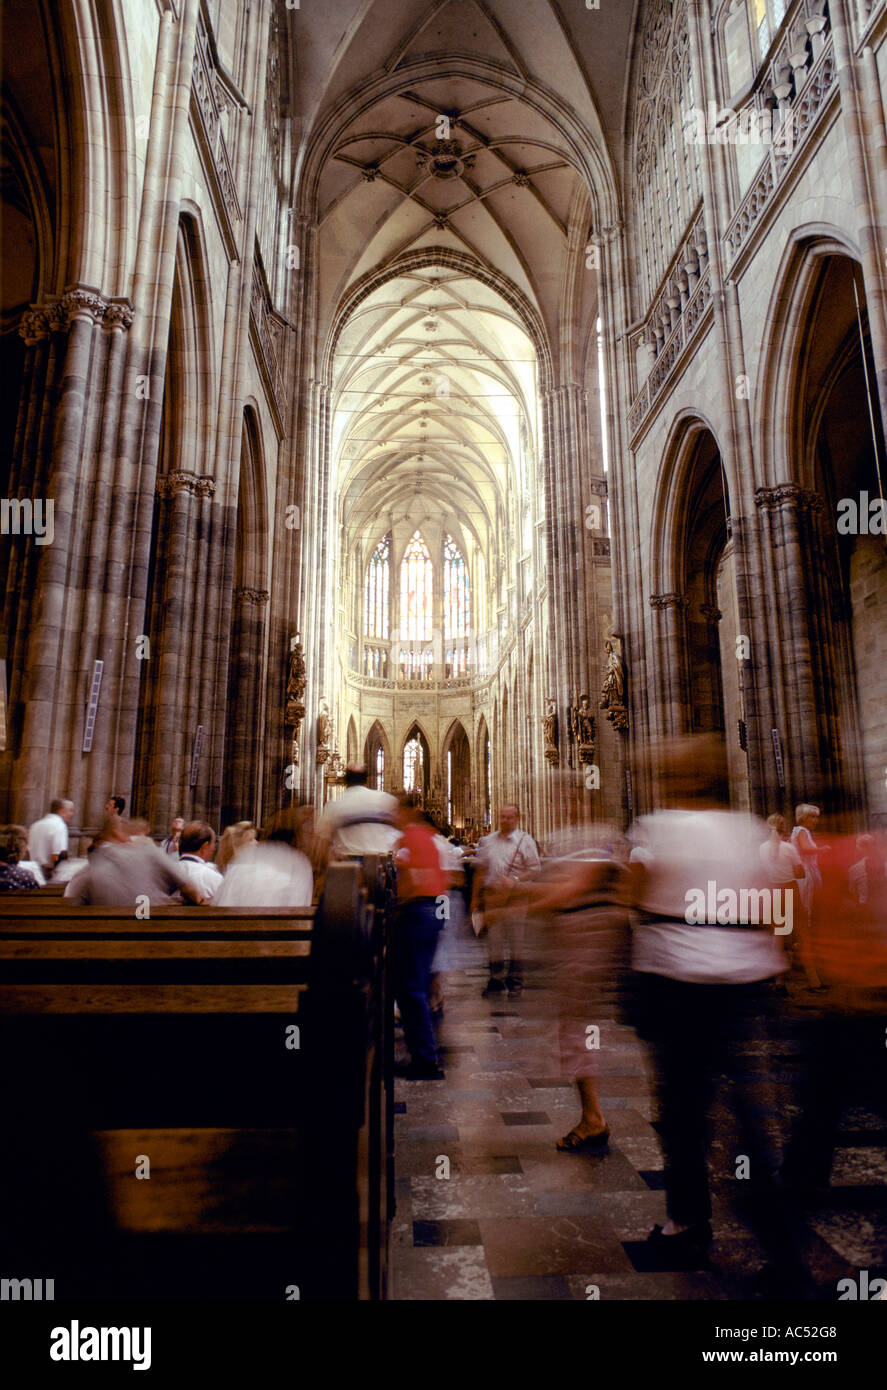 CZECHOSLOVAKIA PRAGUE INSIDE SAINT VITUS CATHEDRAL WHERE MANY FOREIGN VISITORS CONE TO PRAY  Stock Photo